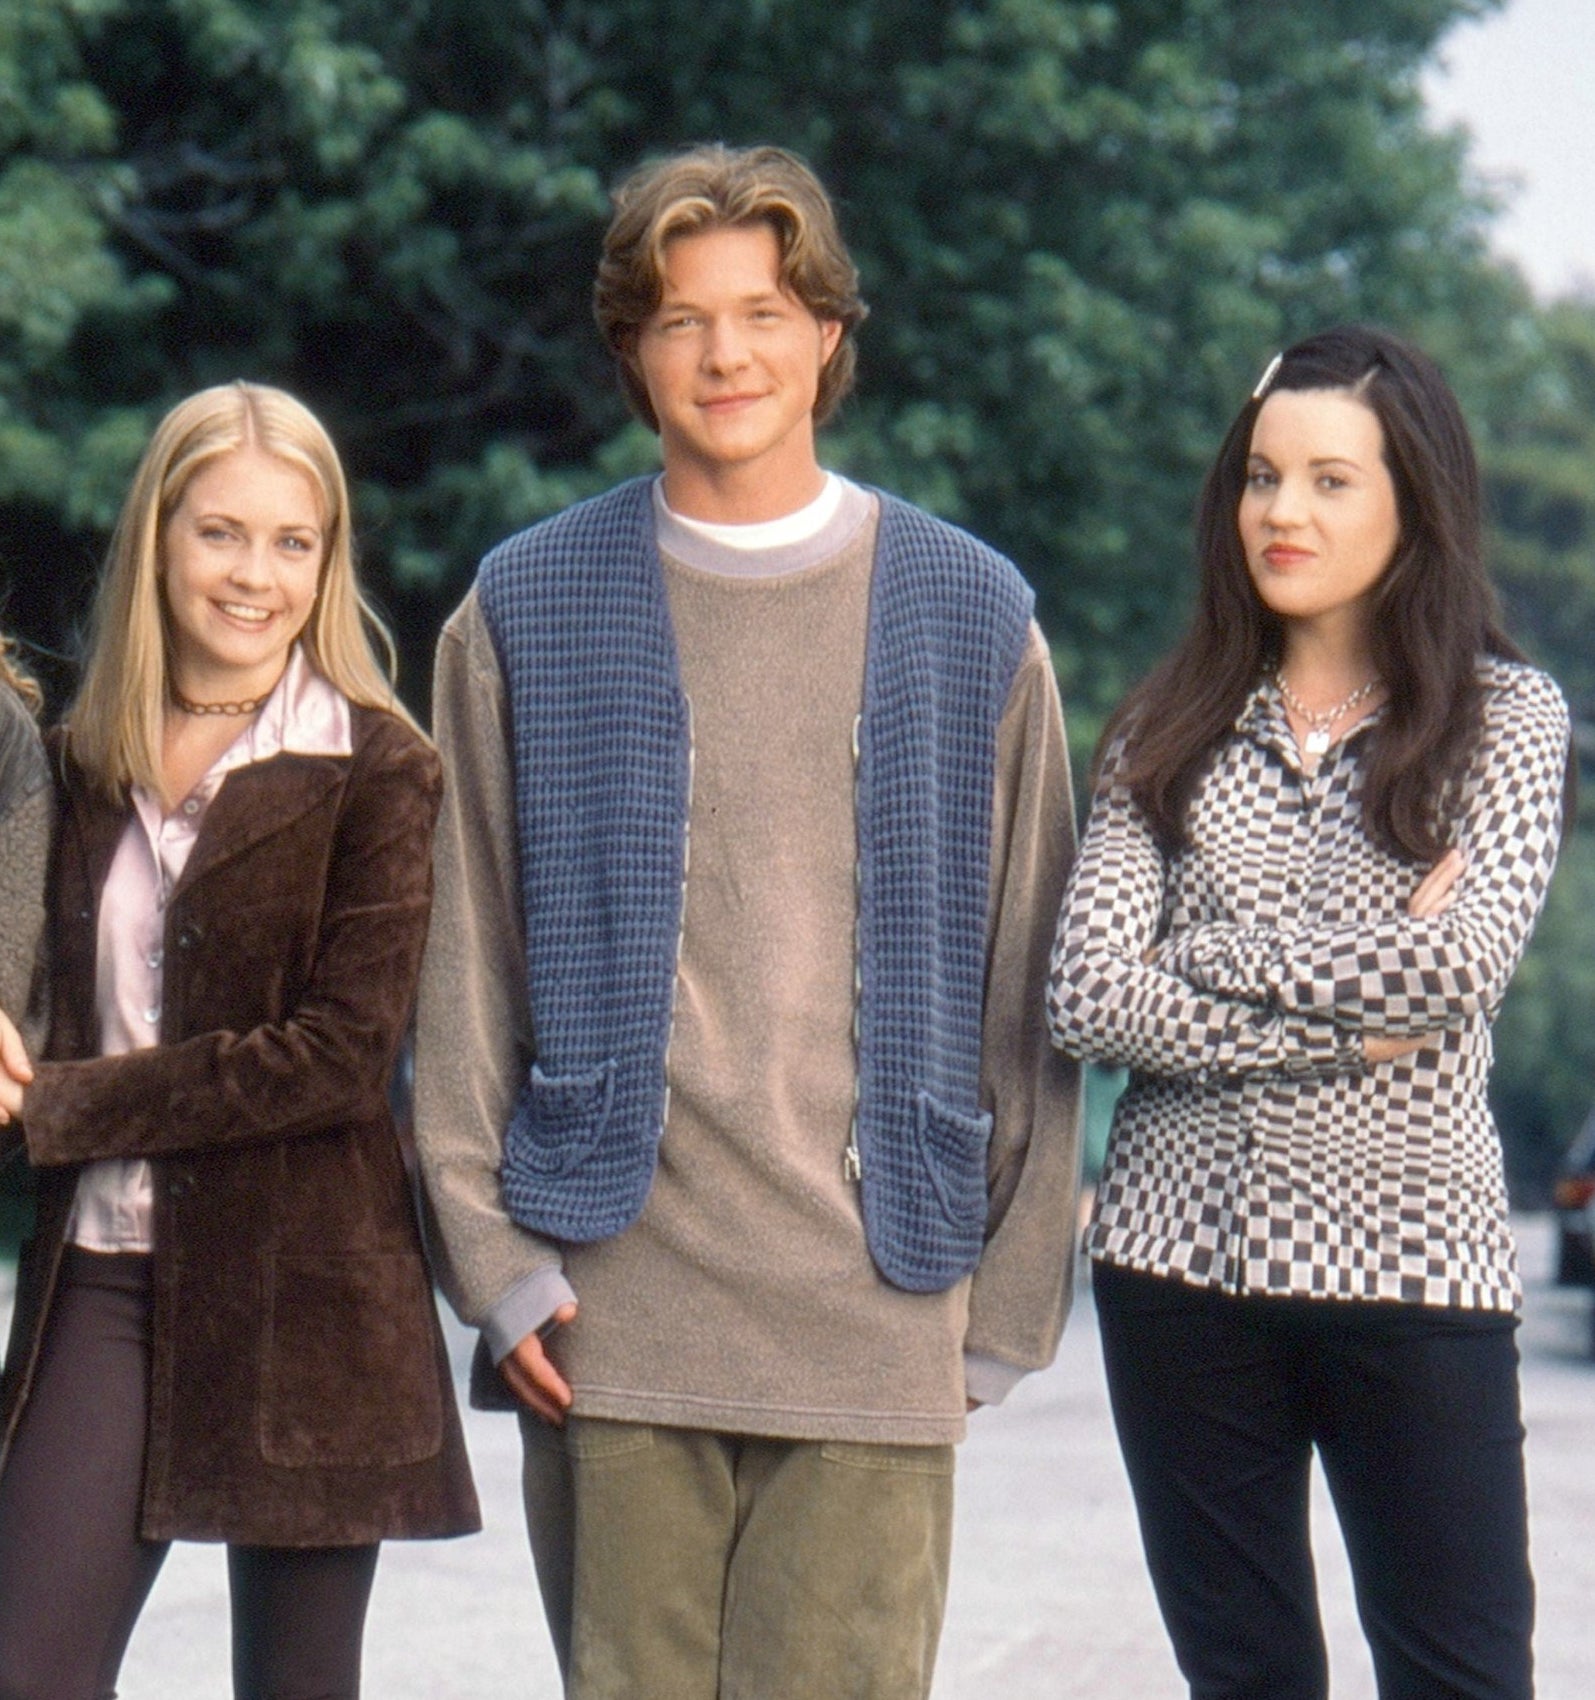 Harvey, played by Nate Richert, stands in between Melissa Joan Hart and Jenna Leigh Green in a throwback photo